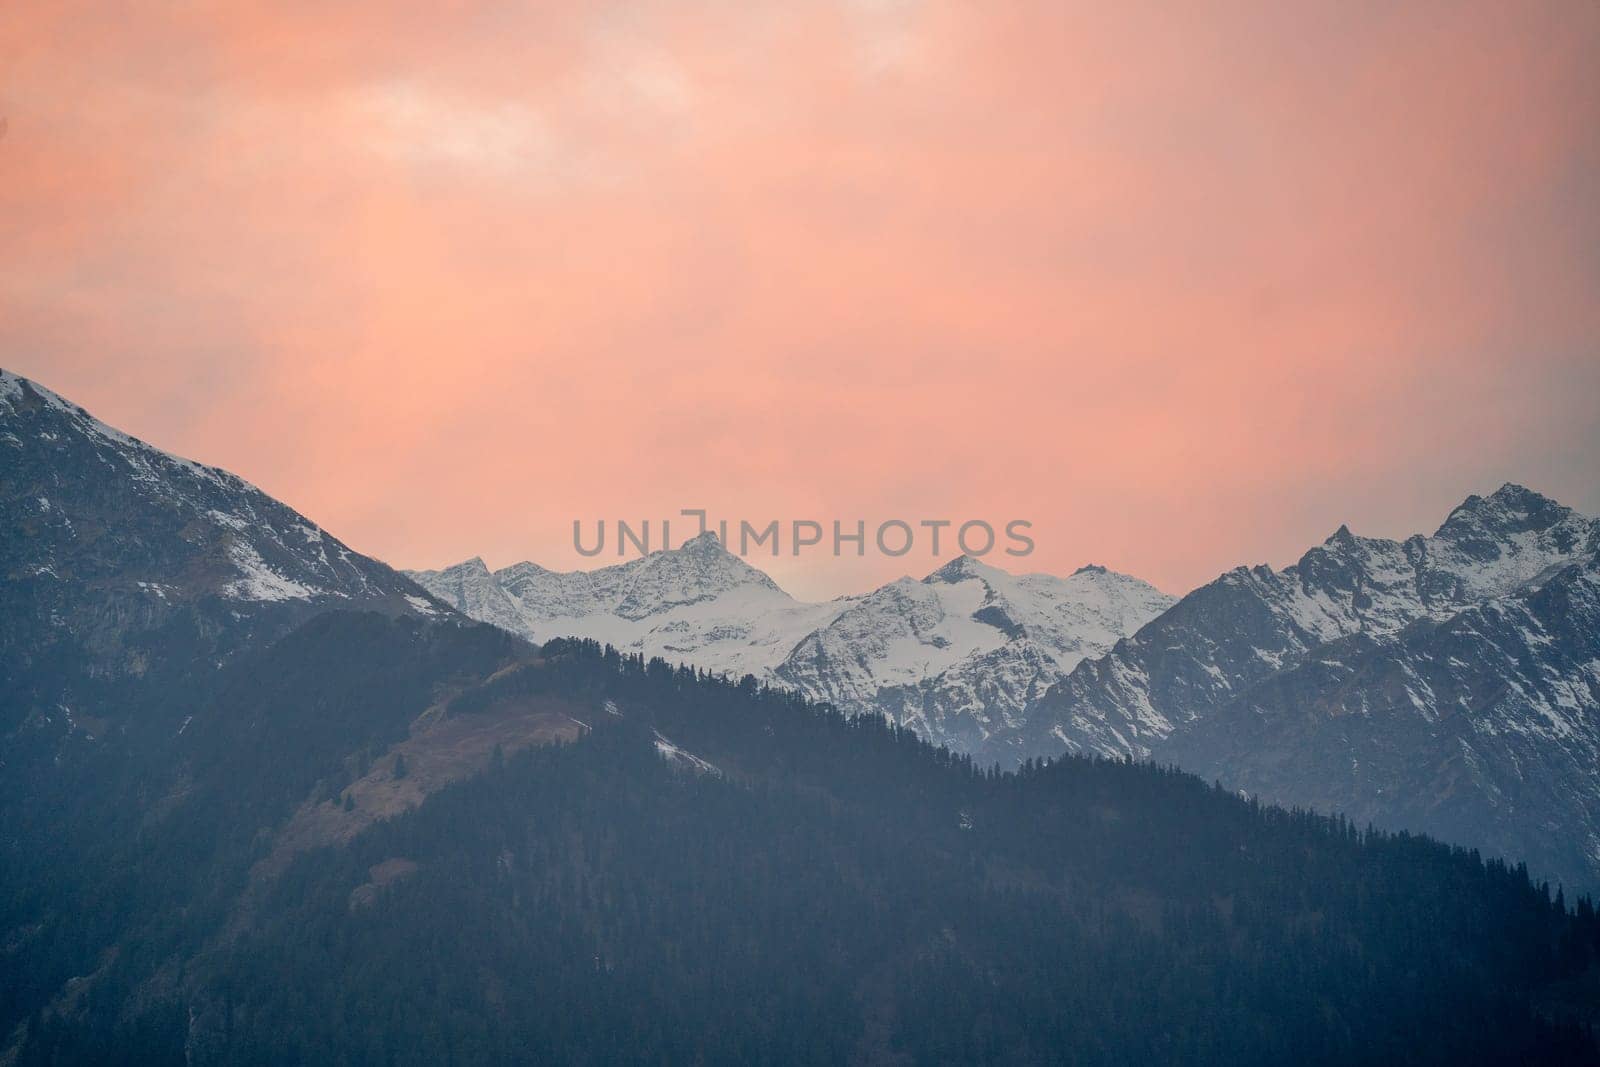 red orange dusk dawn colors over snow covered himalaya mountains and fluffy clouds showing hill stations in jhibbi kullu manali India